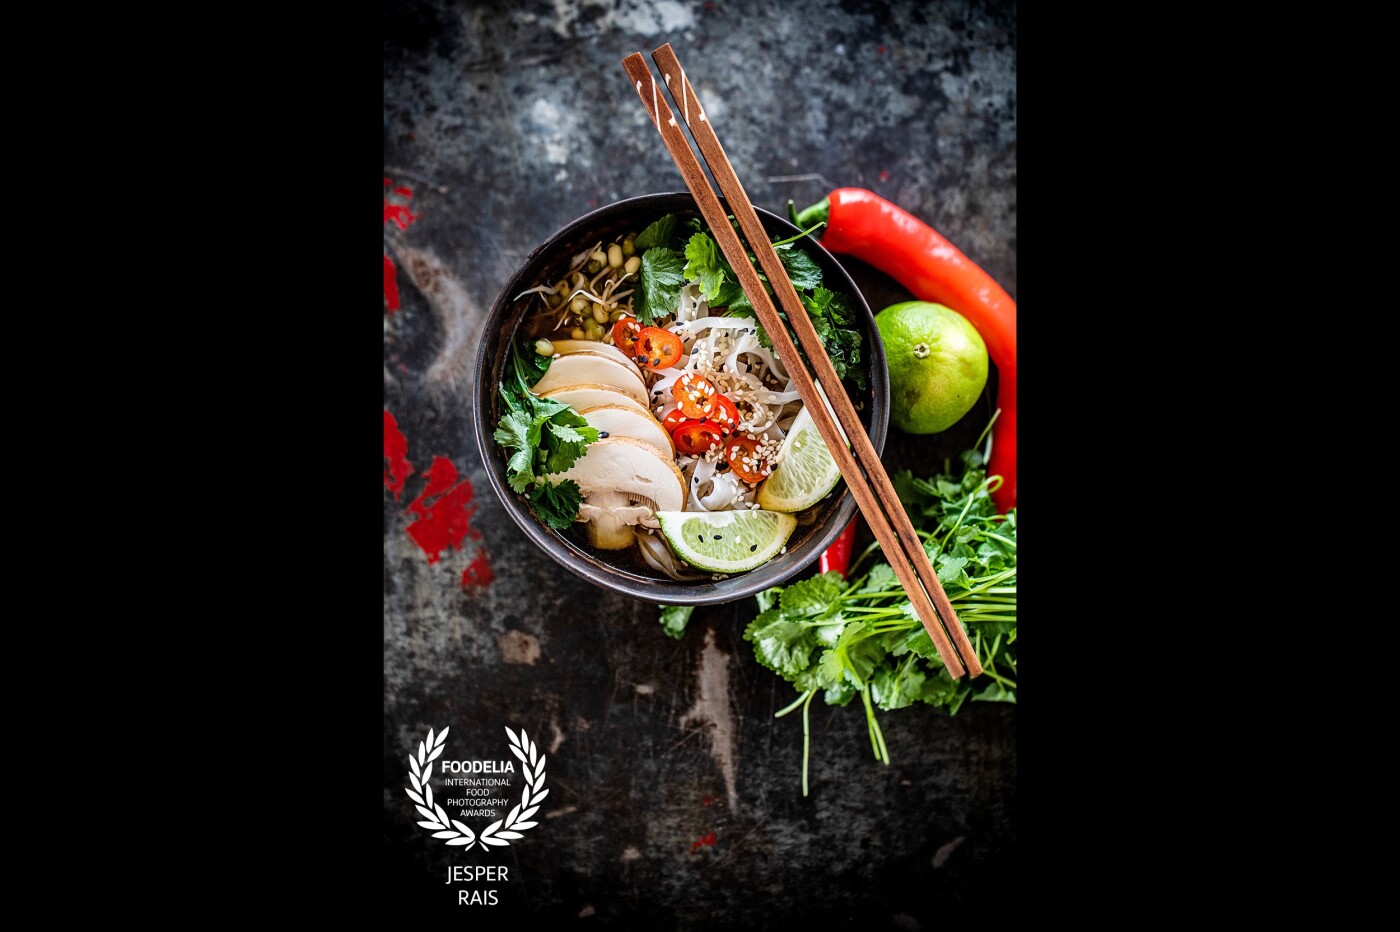 The Vietnamese soup Phở consisting of broth, rice noodles, herbs, vegetables and beef is simply one of my favorite asian dished. Hoping the world soon opens up again, giving us all the possibility to travel the world again to tast amazing flavors all around the globe. 